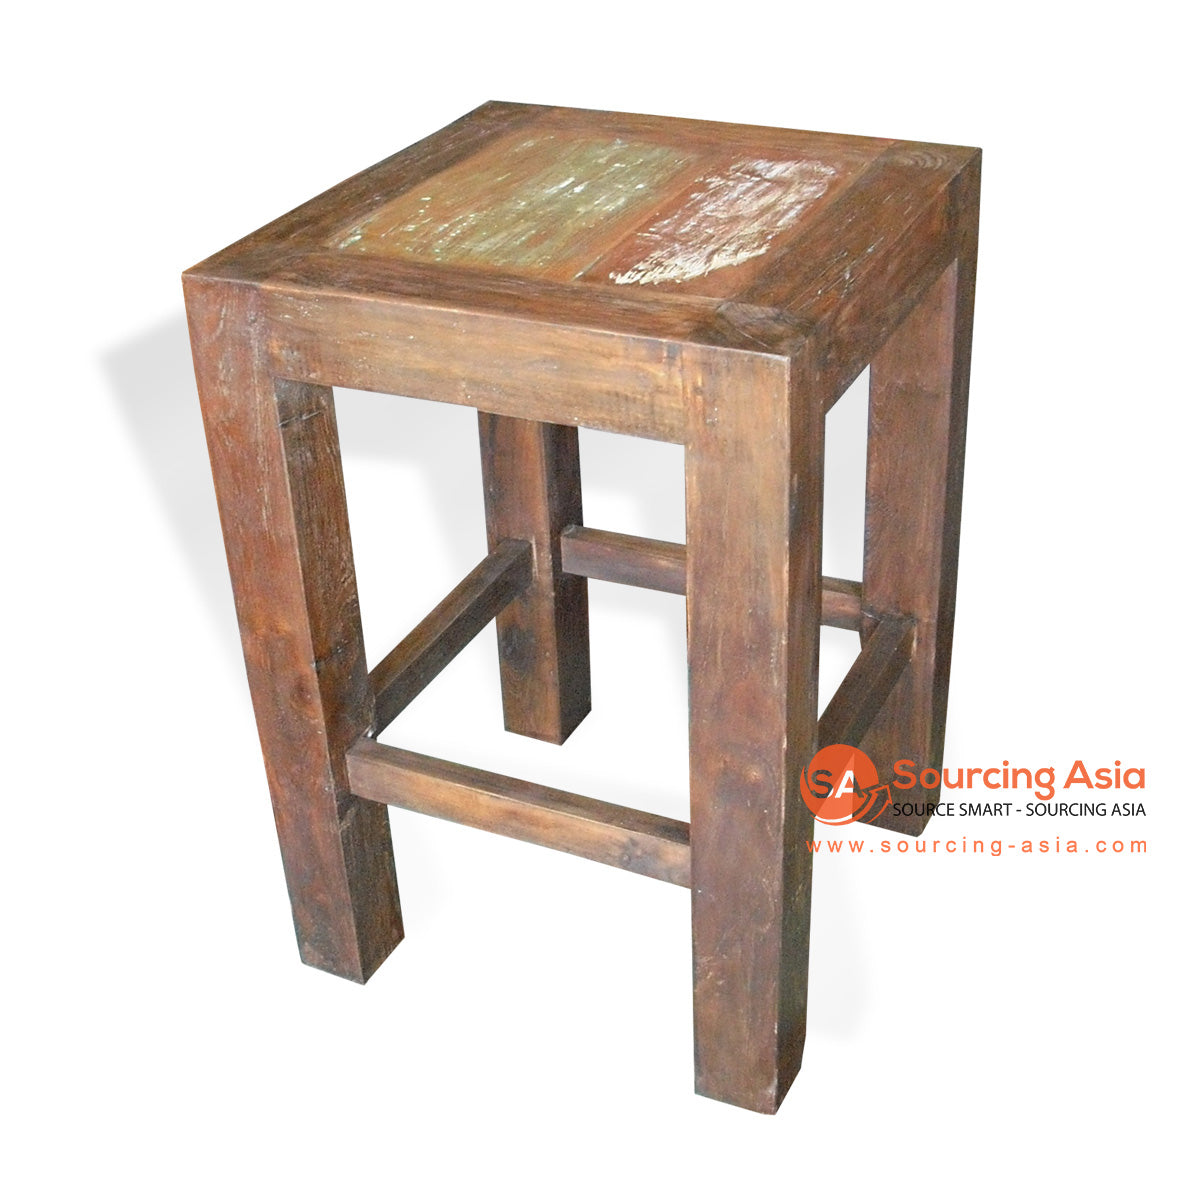 WK212-1 NATURAL RECYCLED BOAT WOOD SQUARE STOOL